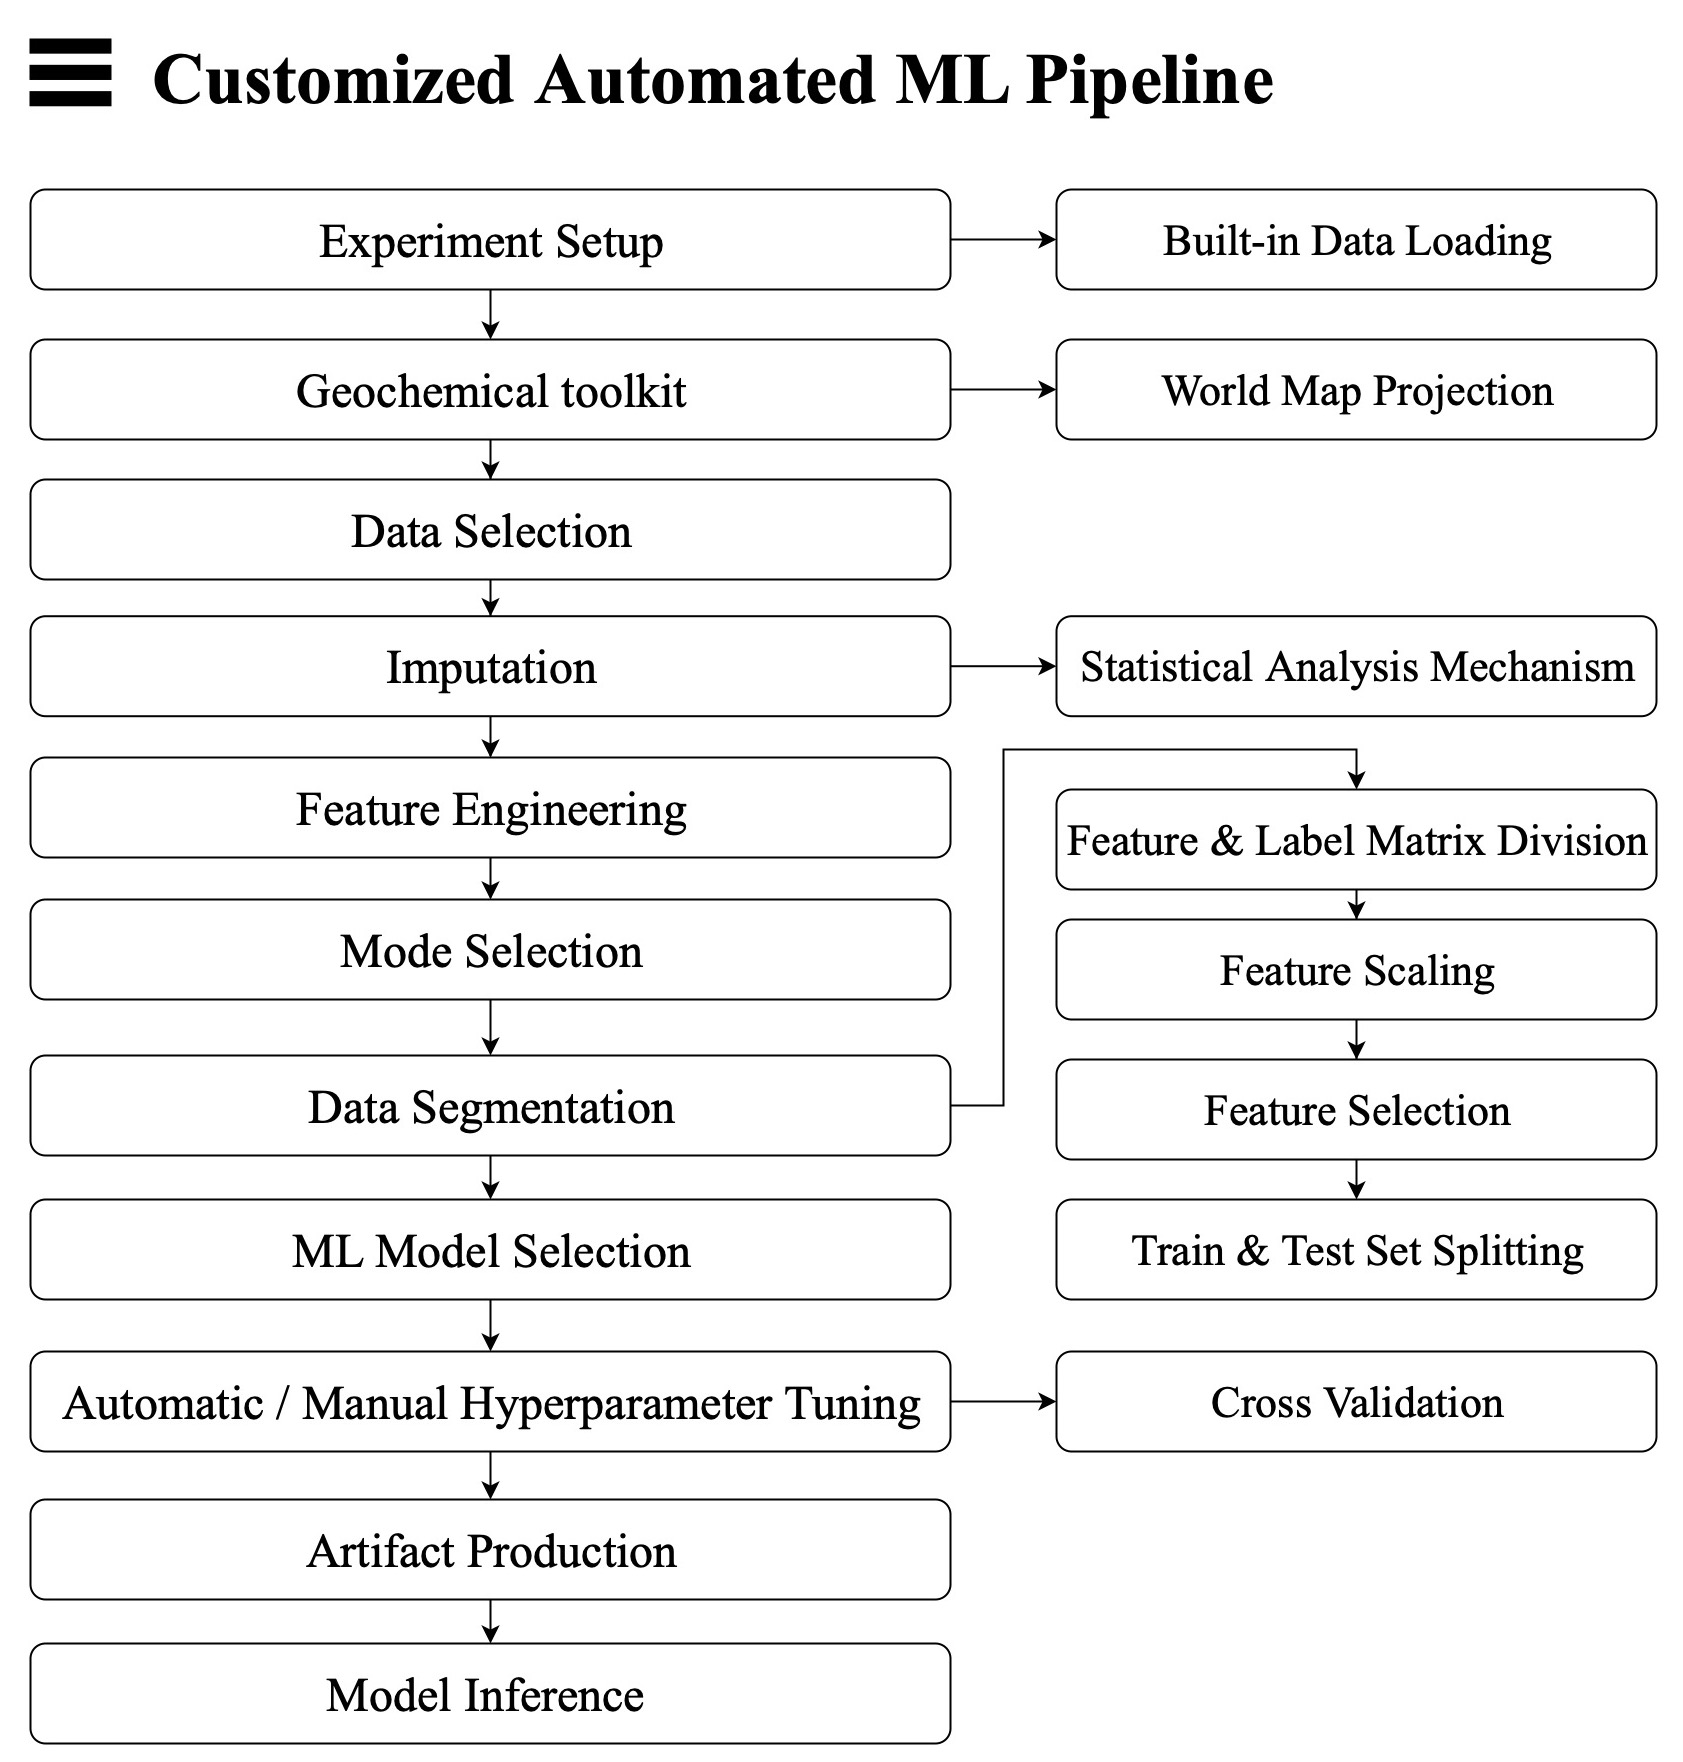 Customized automated ML pipeline